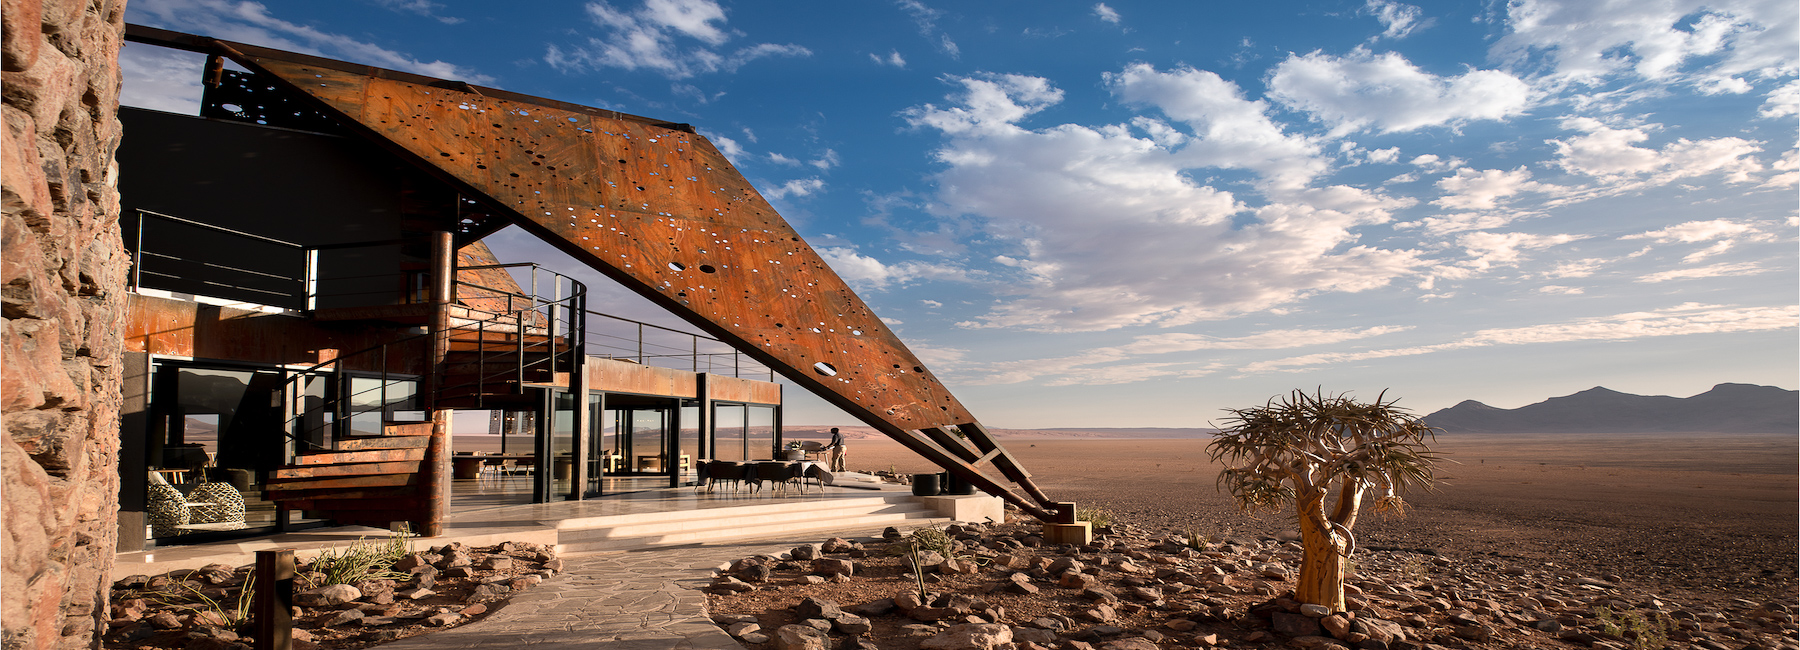 sossusvlei lodge is a sustainable getaway in the heart of africa's namib desert